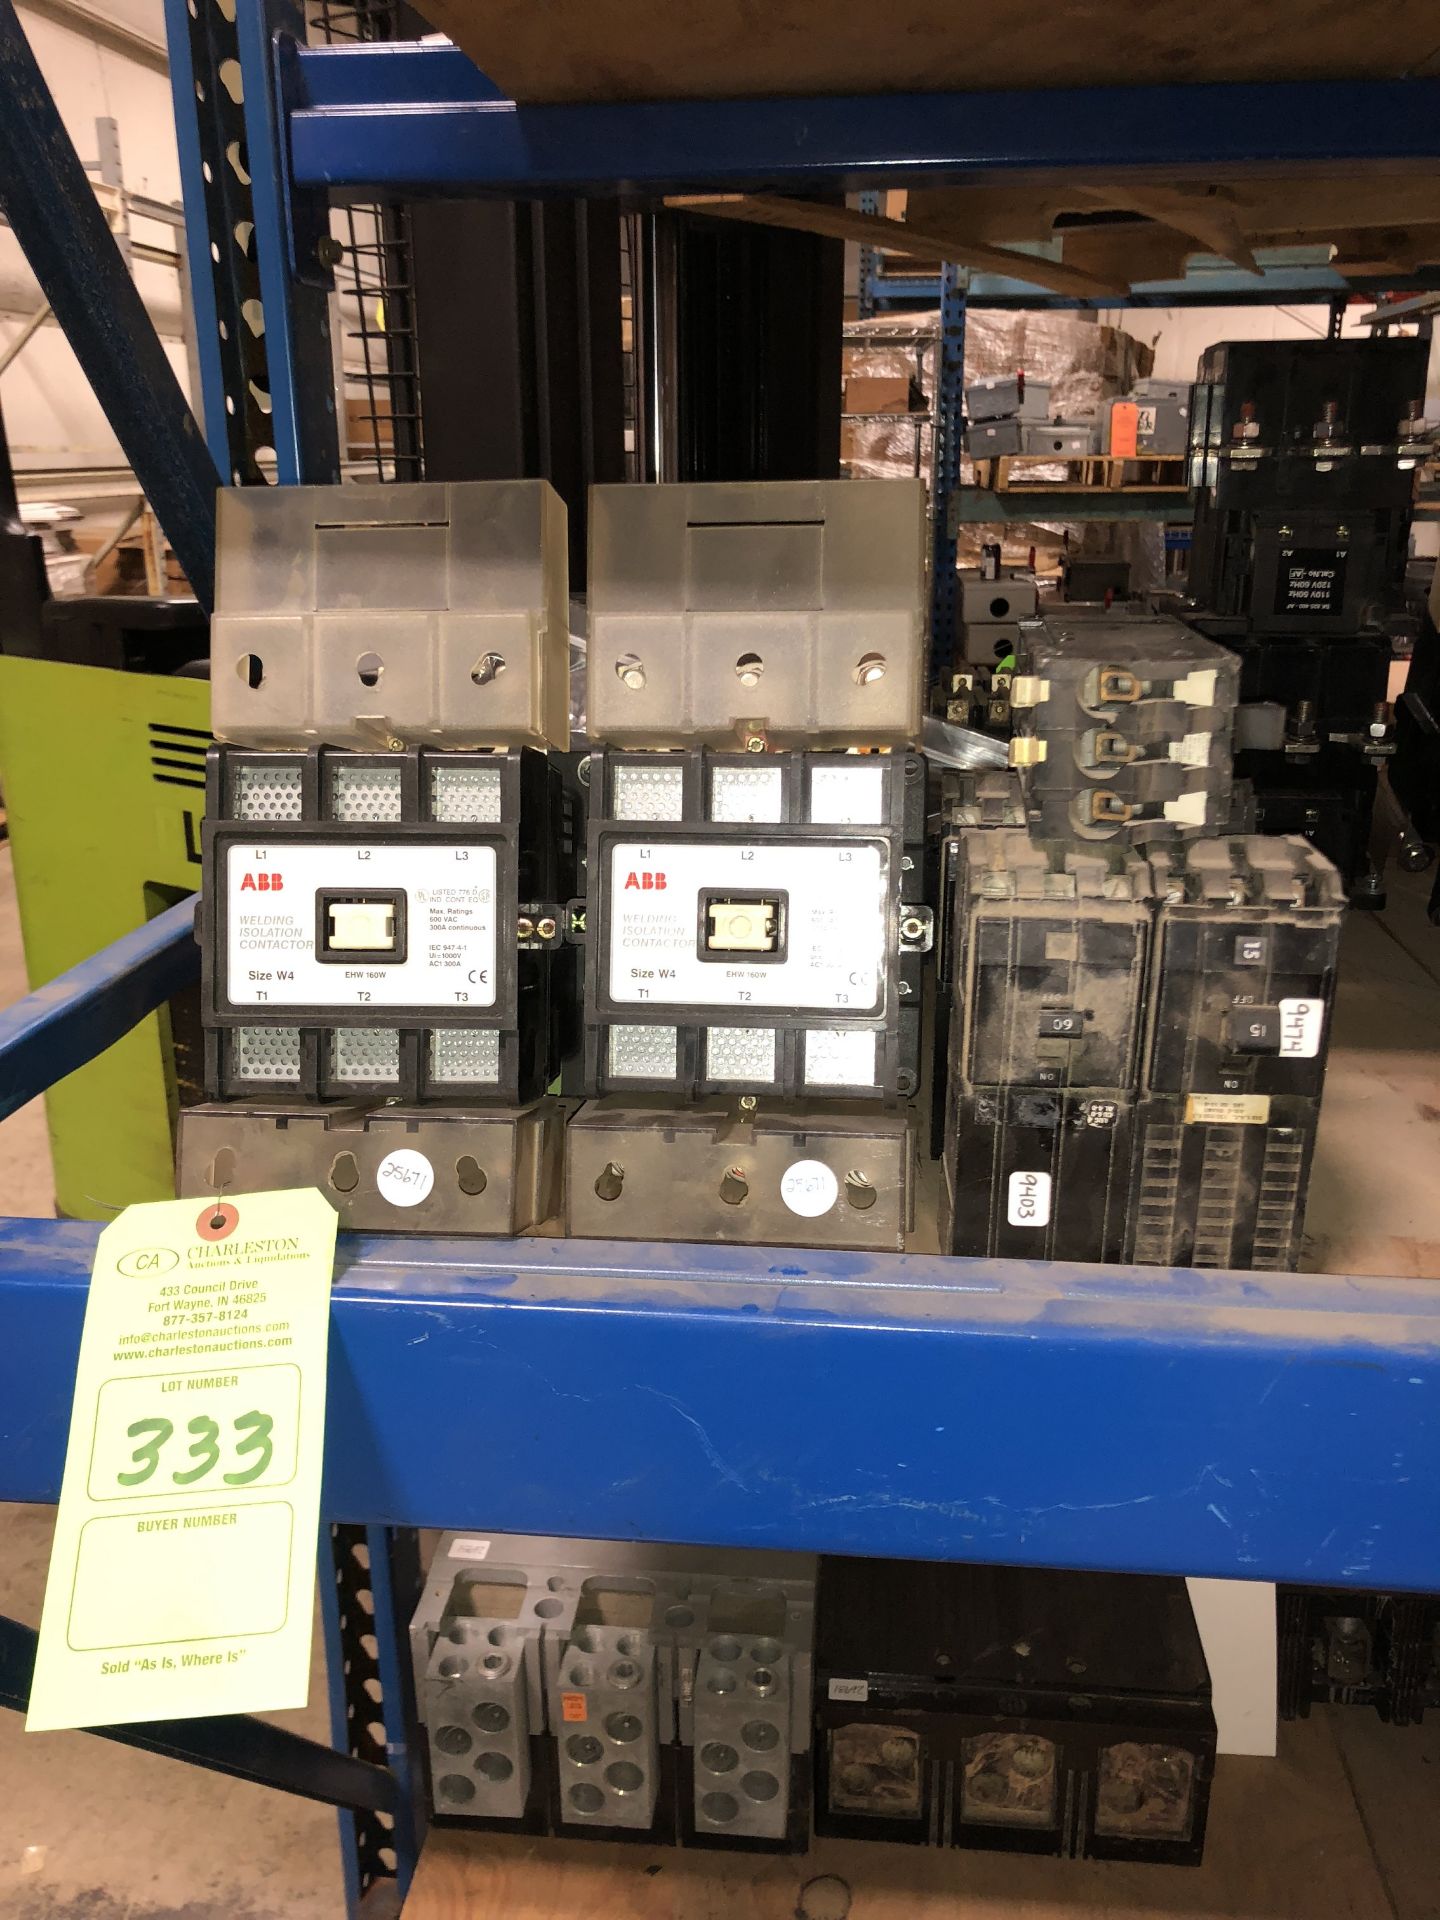 (2) ABB WELDING ISOLATION CONTACTOR SIZE-W4 600V/300A CONTINUOUS